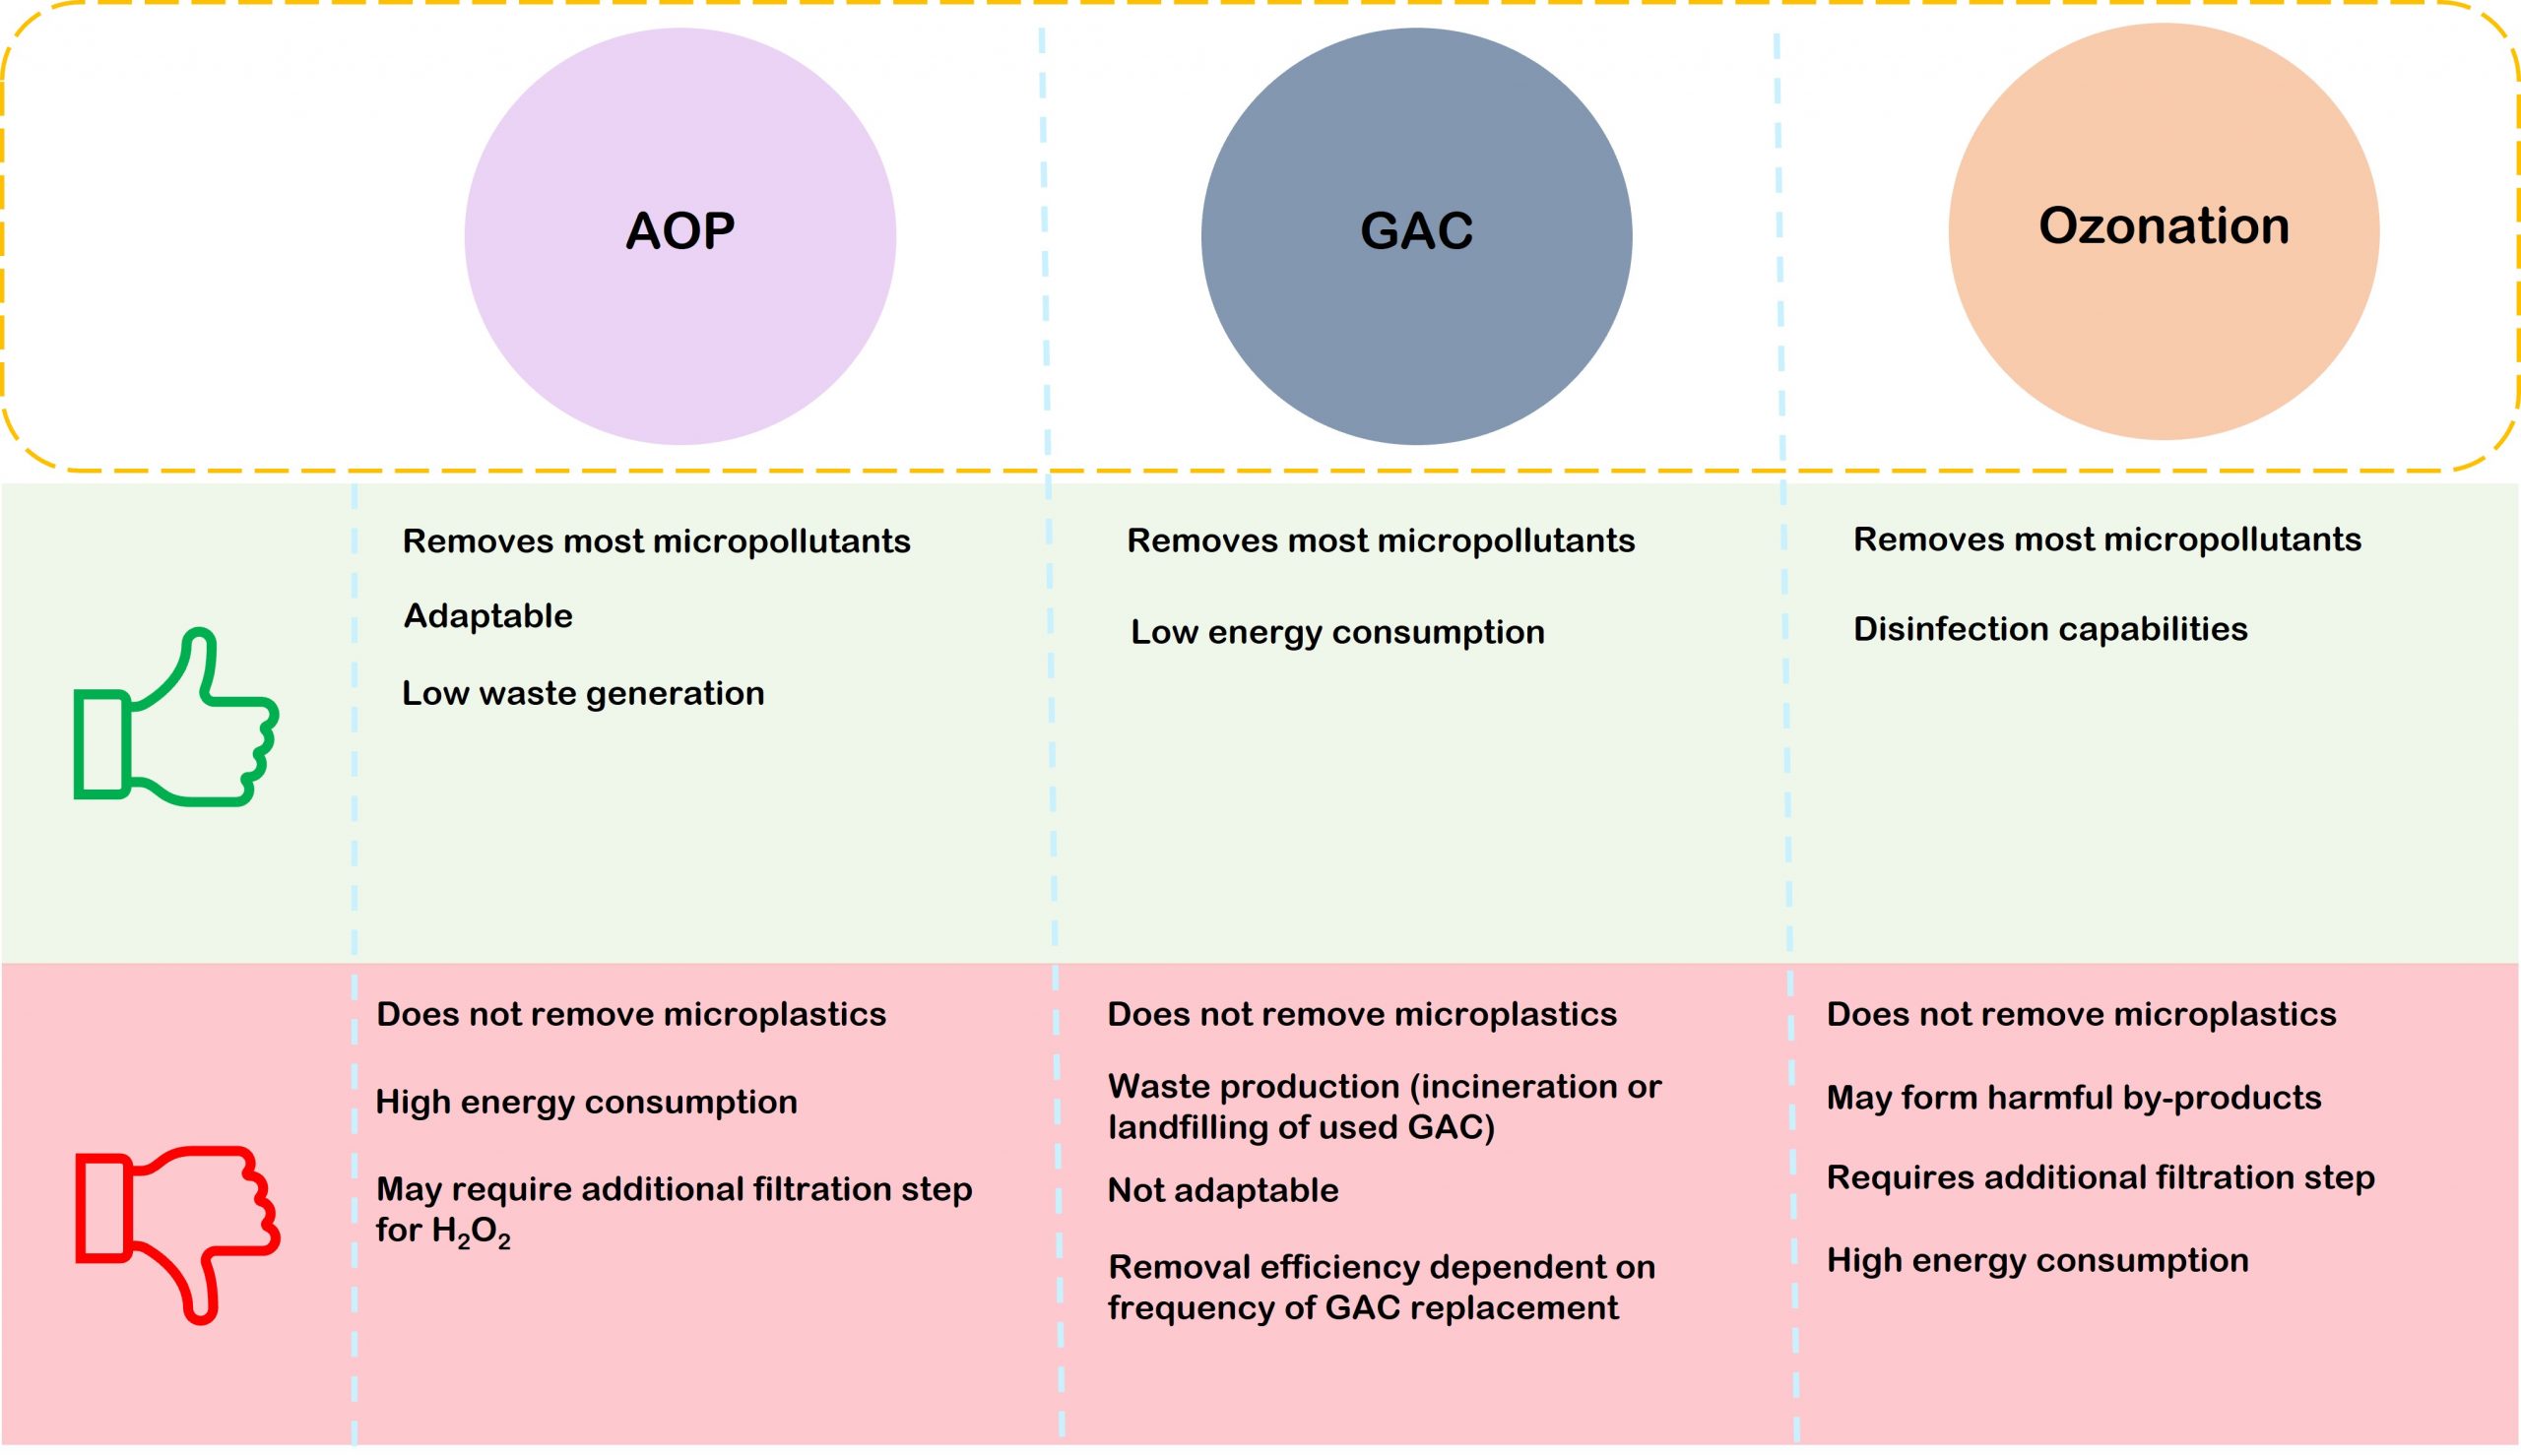 Overview of some advantages and disadvantages of AOP, GAC, and ozonation as an advanced treatment step for micropollutant removal from wastewaters. 